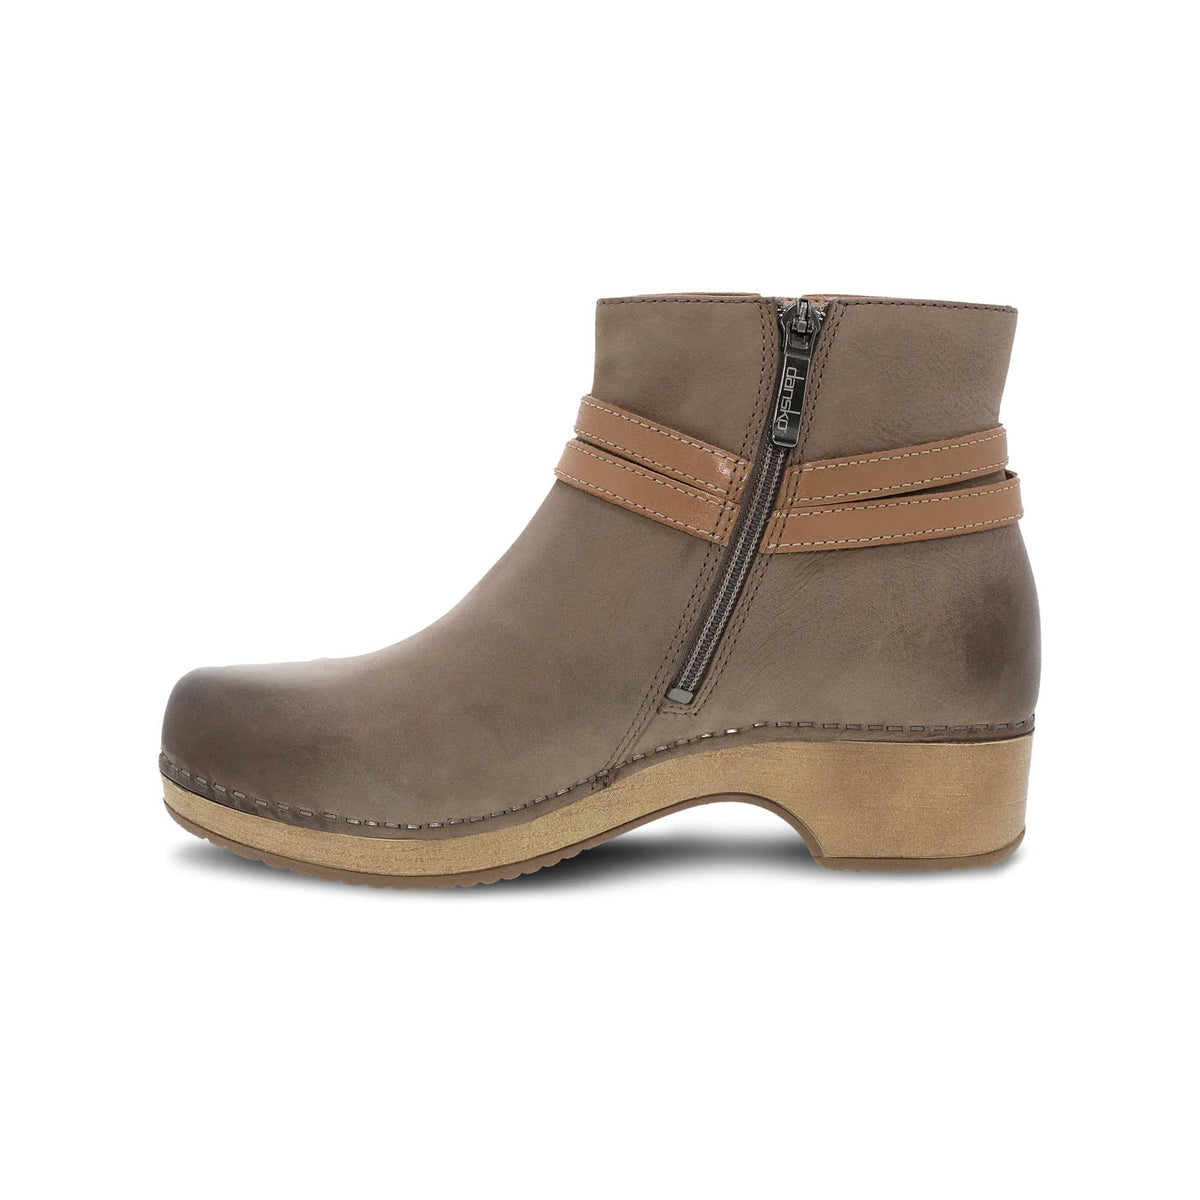 A single Dansko Brook Taupe Burnished ankle bootie with a zipper, decorative stitching, and a wooden heel, isolated on a white background.